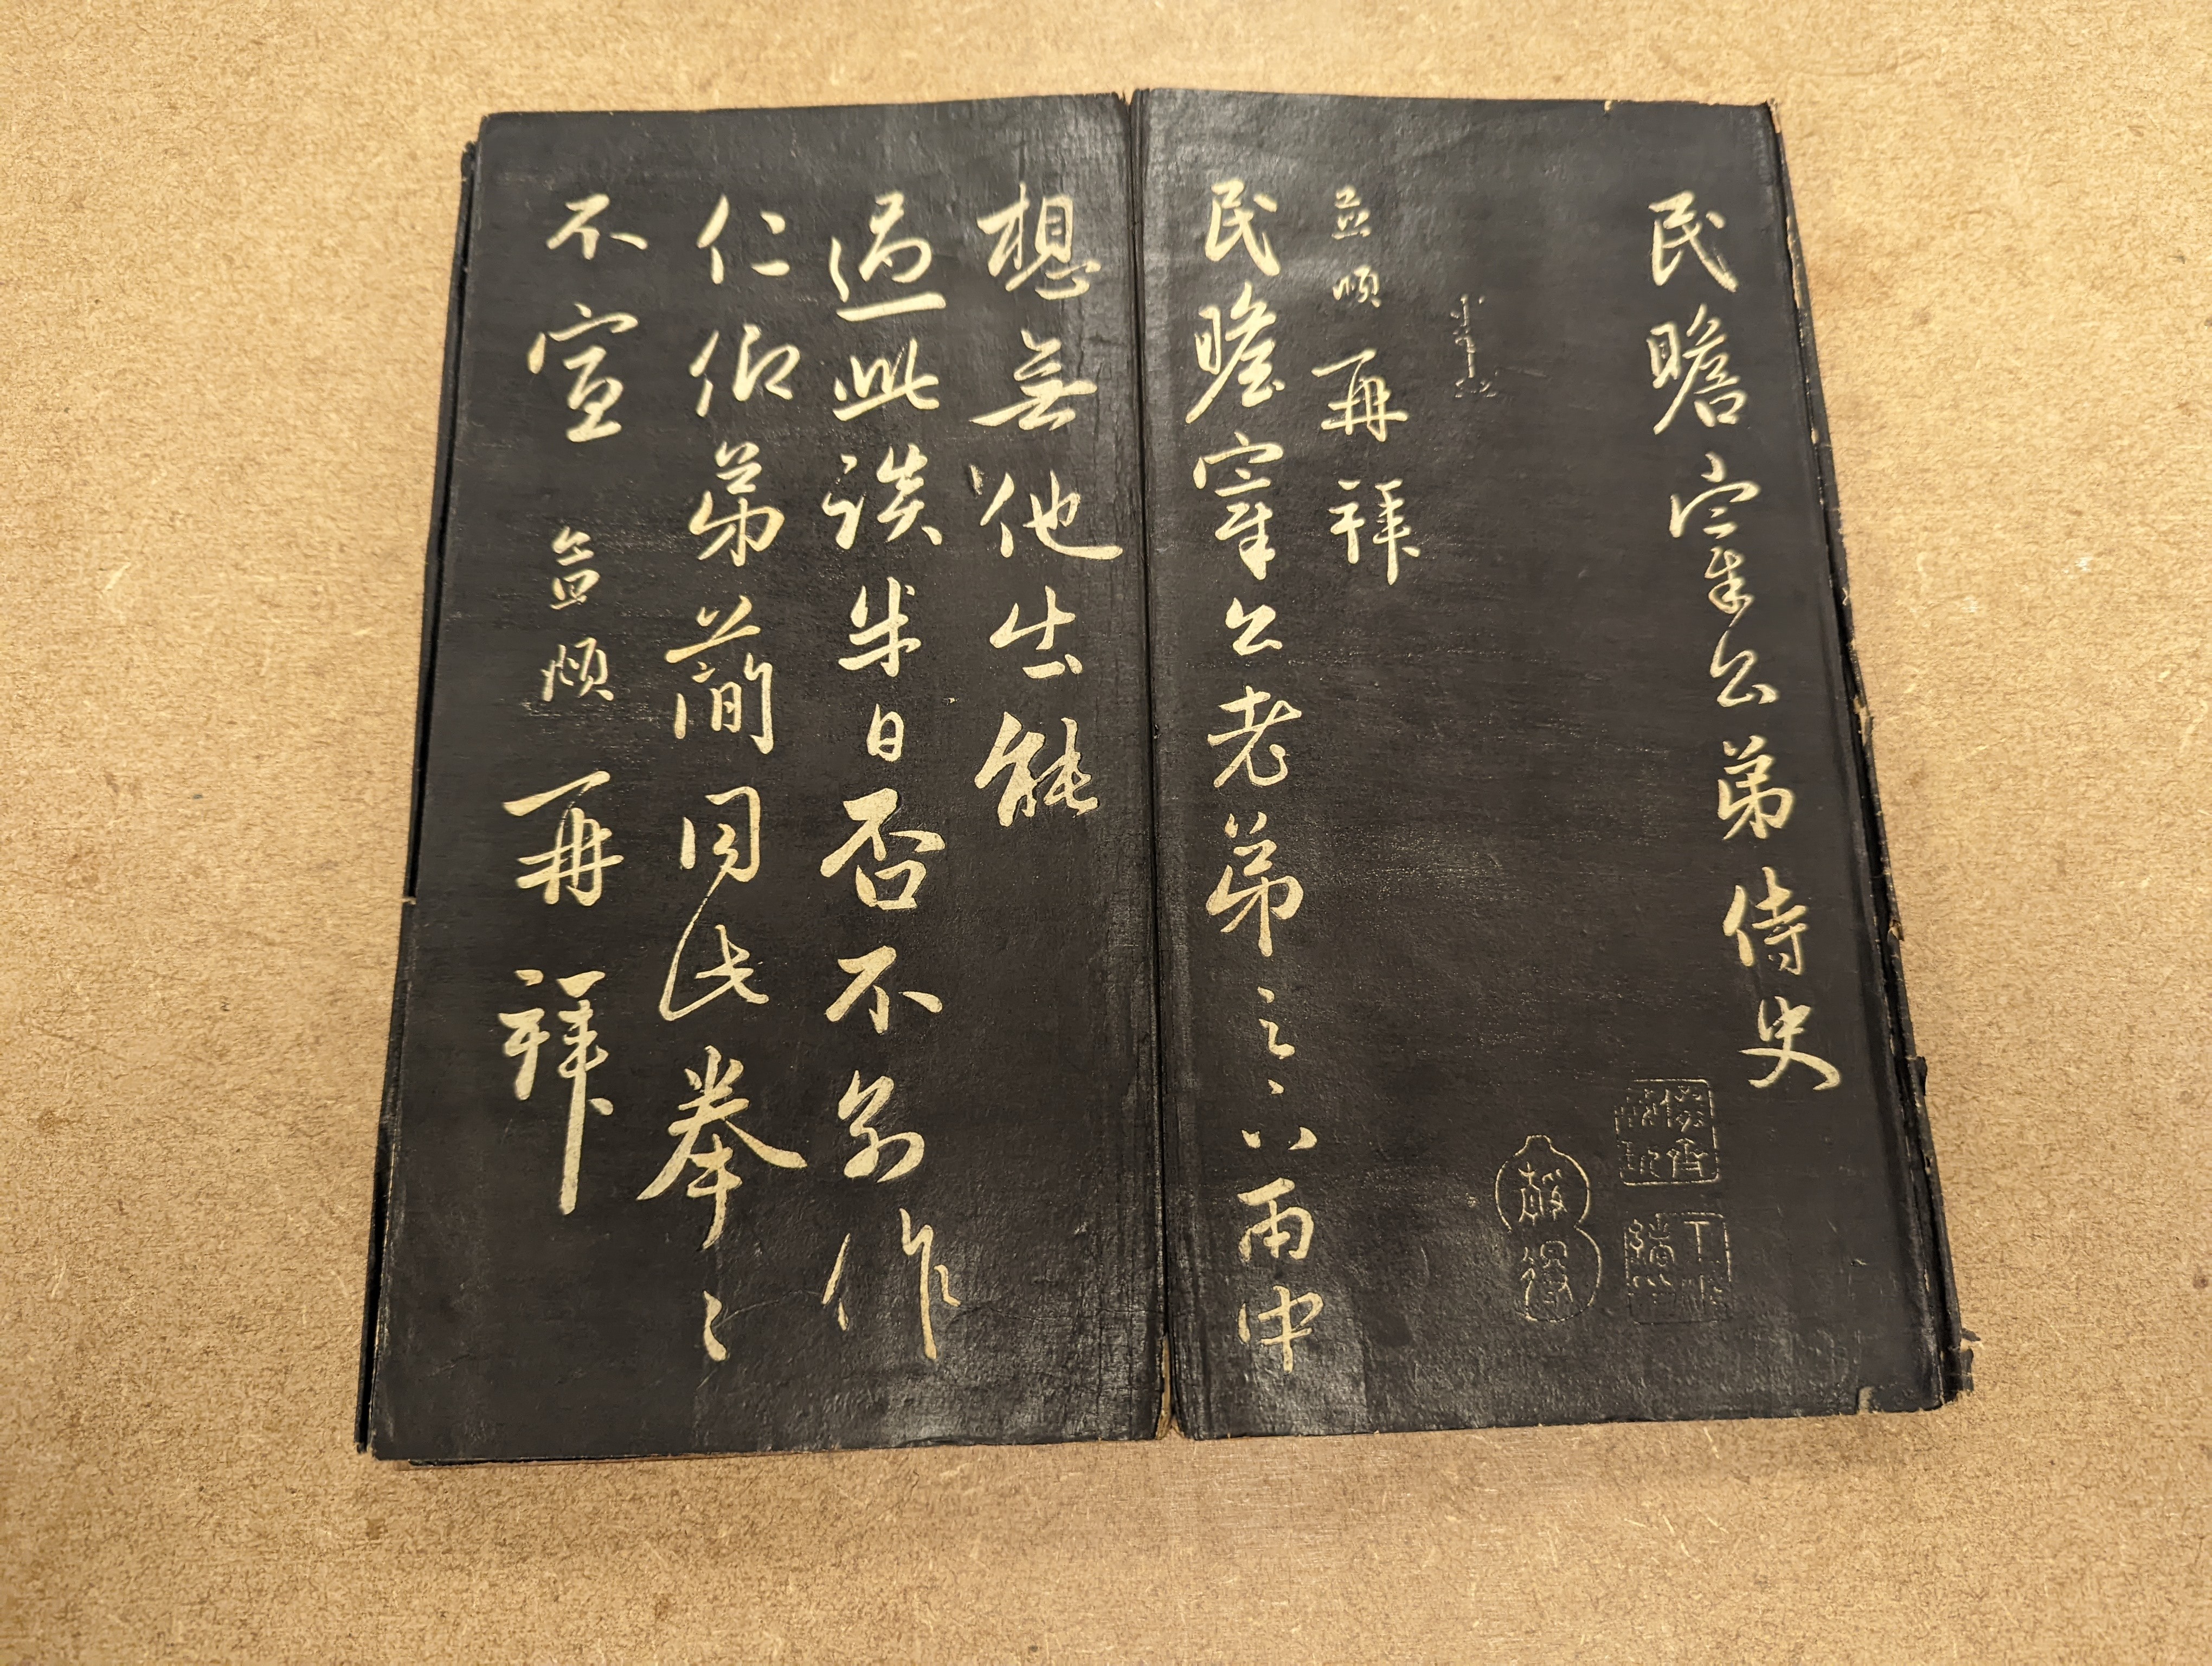 An early 20th century Chinese calligraphy rubbing concertina book